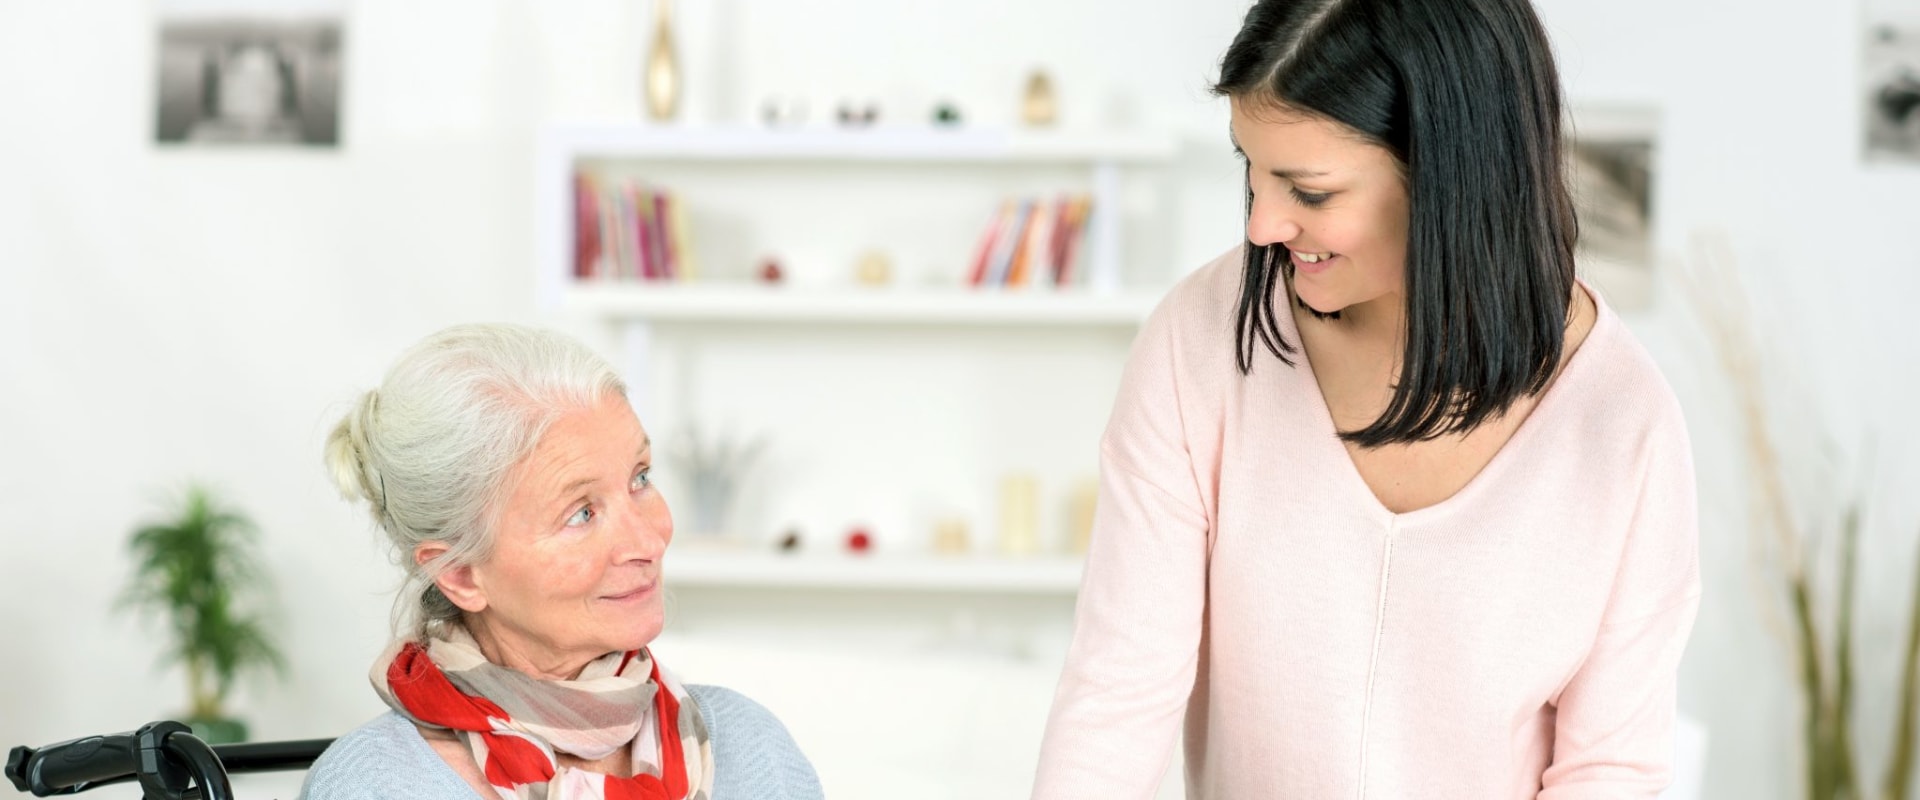 What are the 3 most important qualities of a good carer?